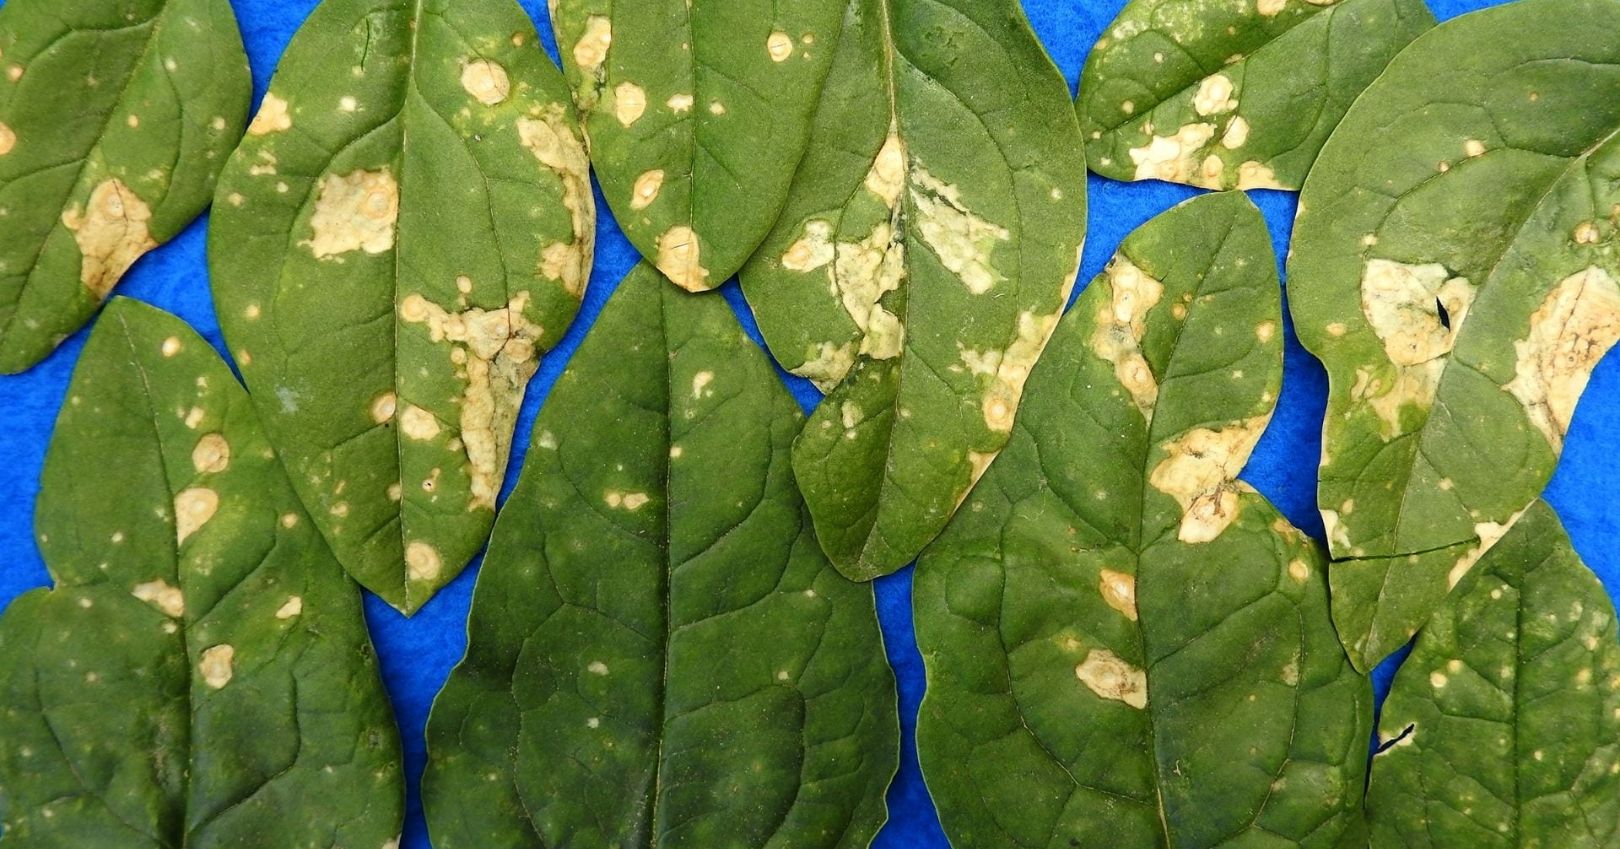 Stemphylium Leaf Spot on Spinach